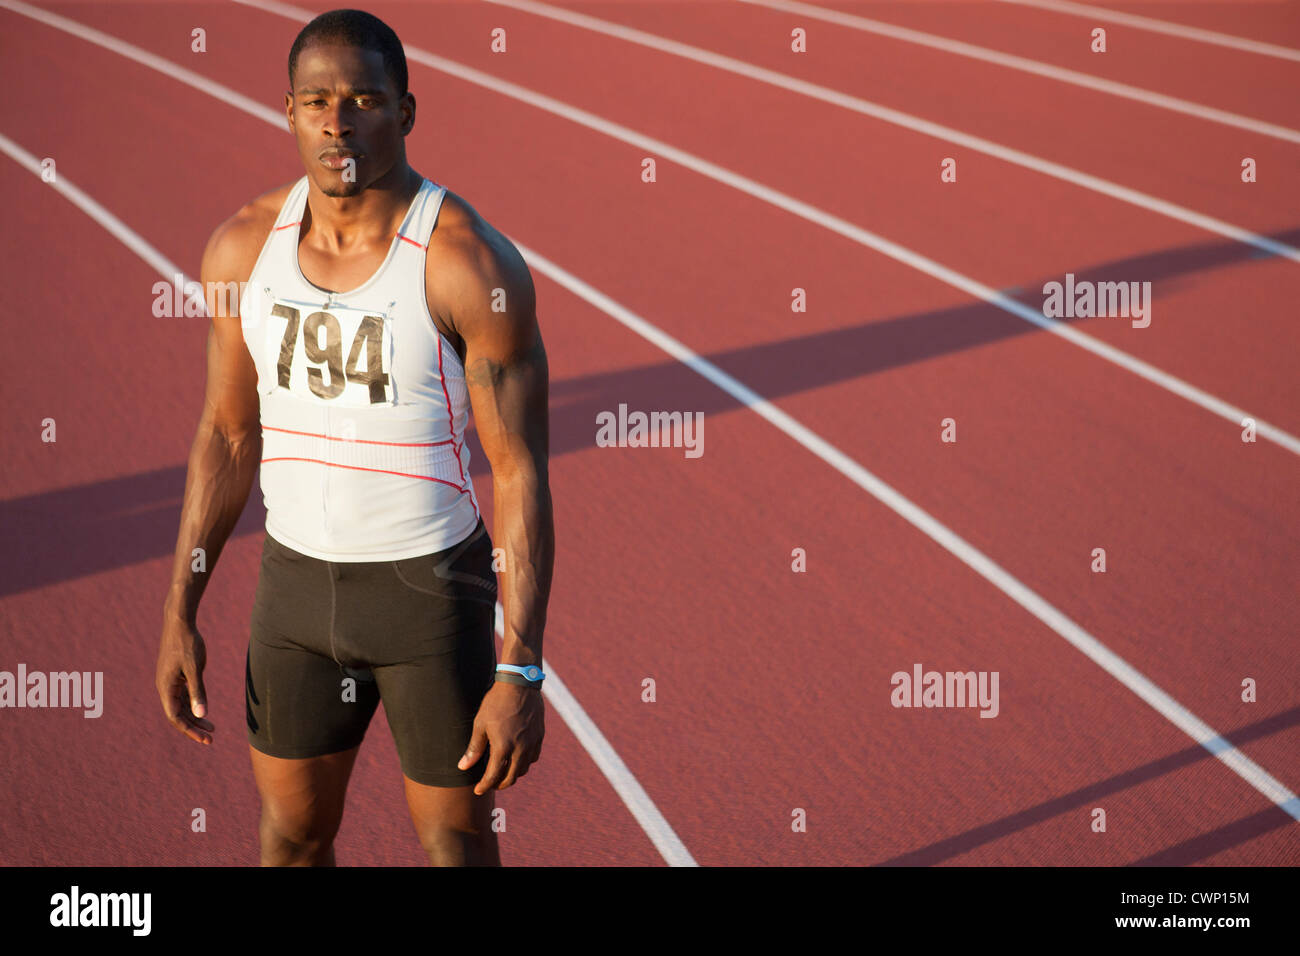 Young athlete standing on running track, portrait Stock Photo